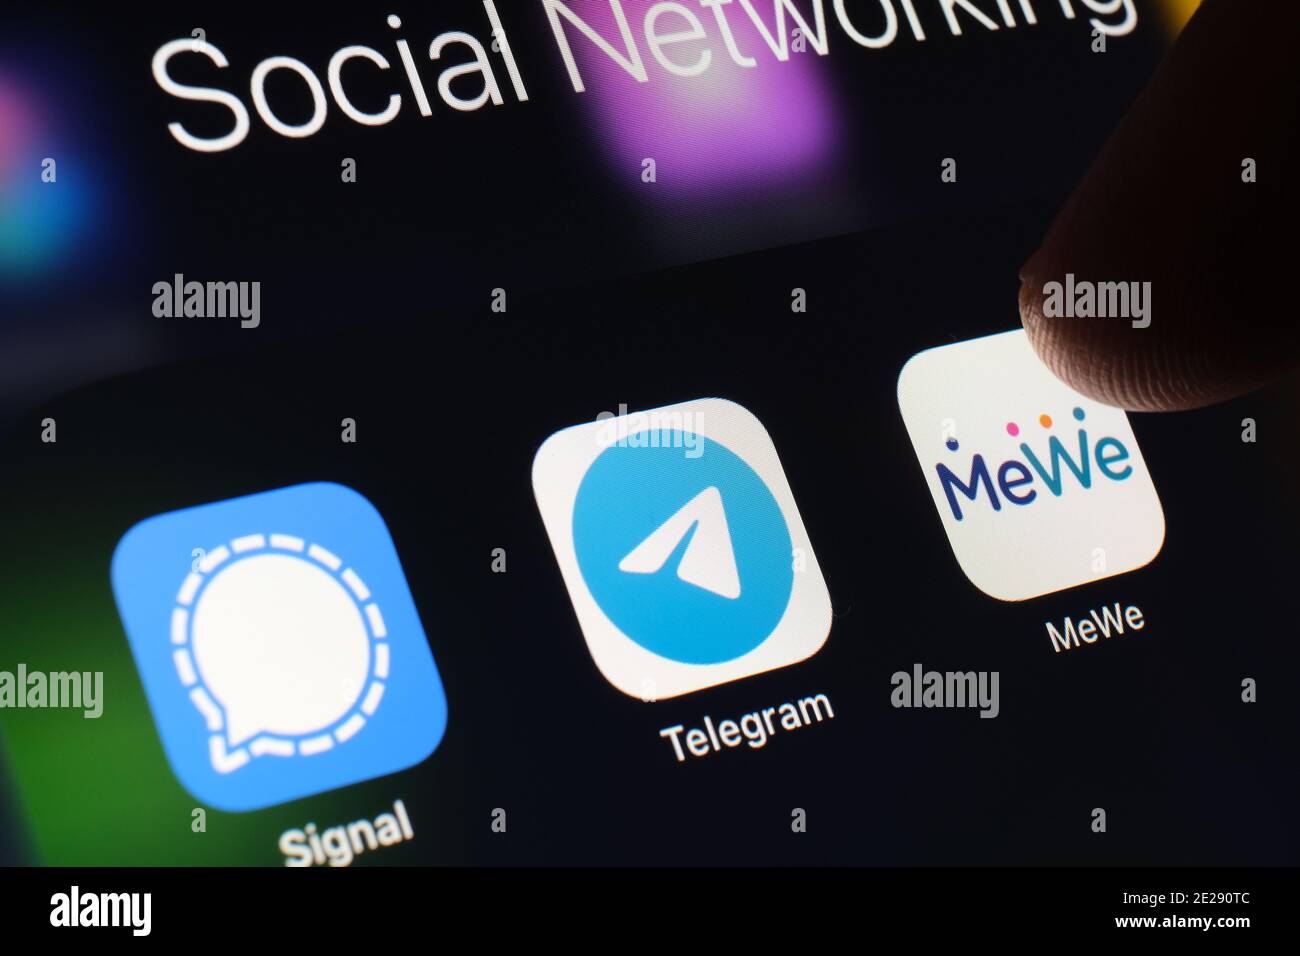 Stafford, UK - January 12 2021: Signal, Telegram, MeWe apps and blurred finger above them. Social network apps gaining popularity in the United States Stock Photo